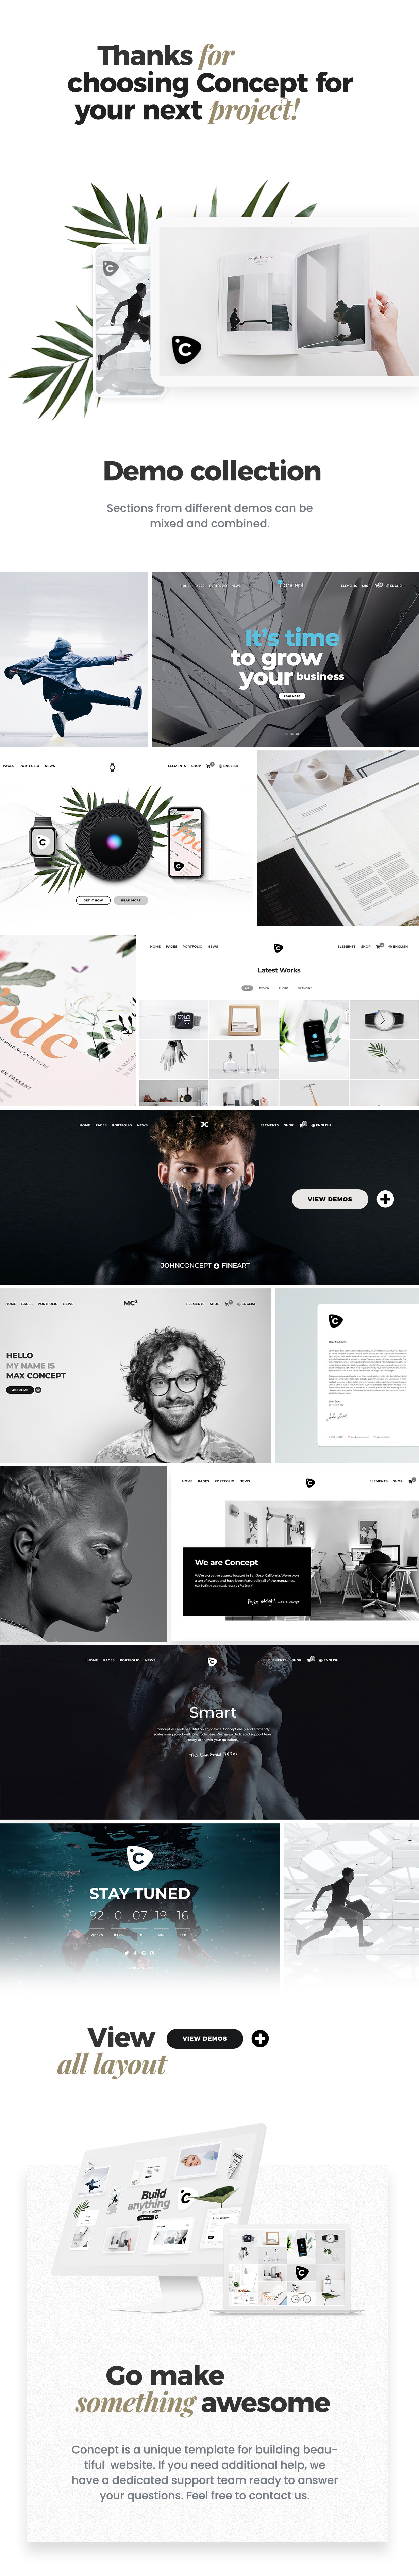 Concept - Creative and Business, Multi-Concept Template - 1